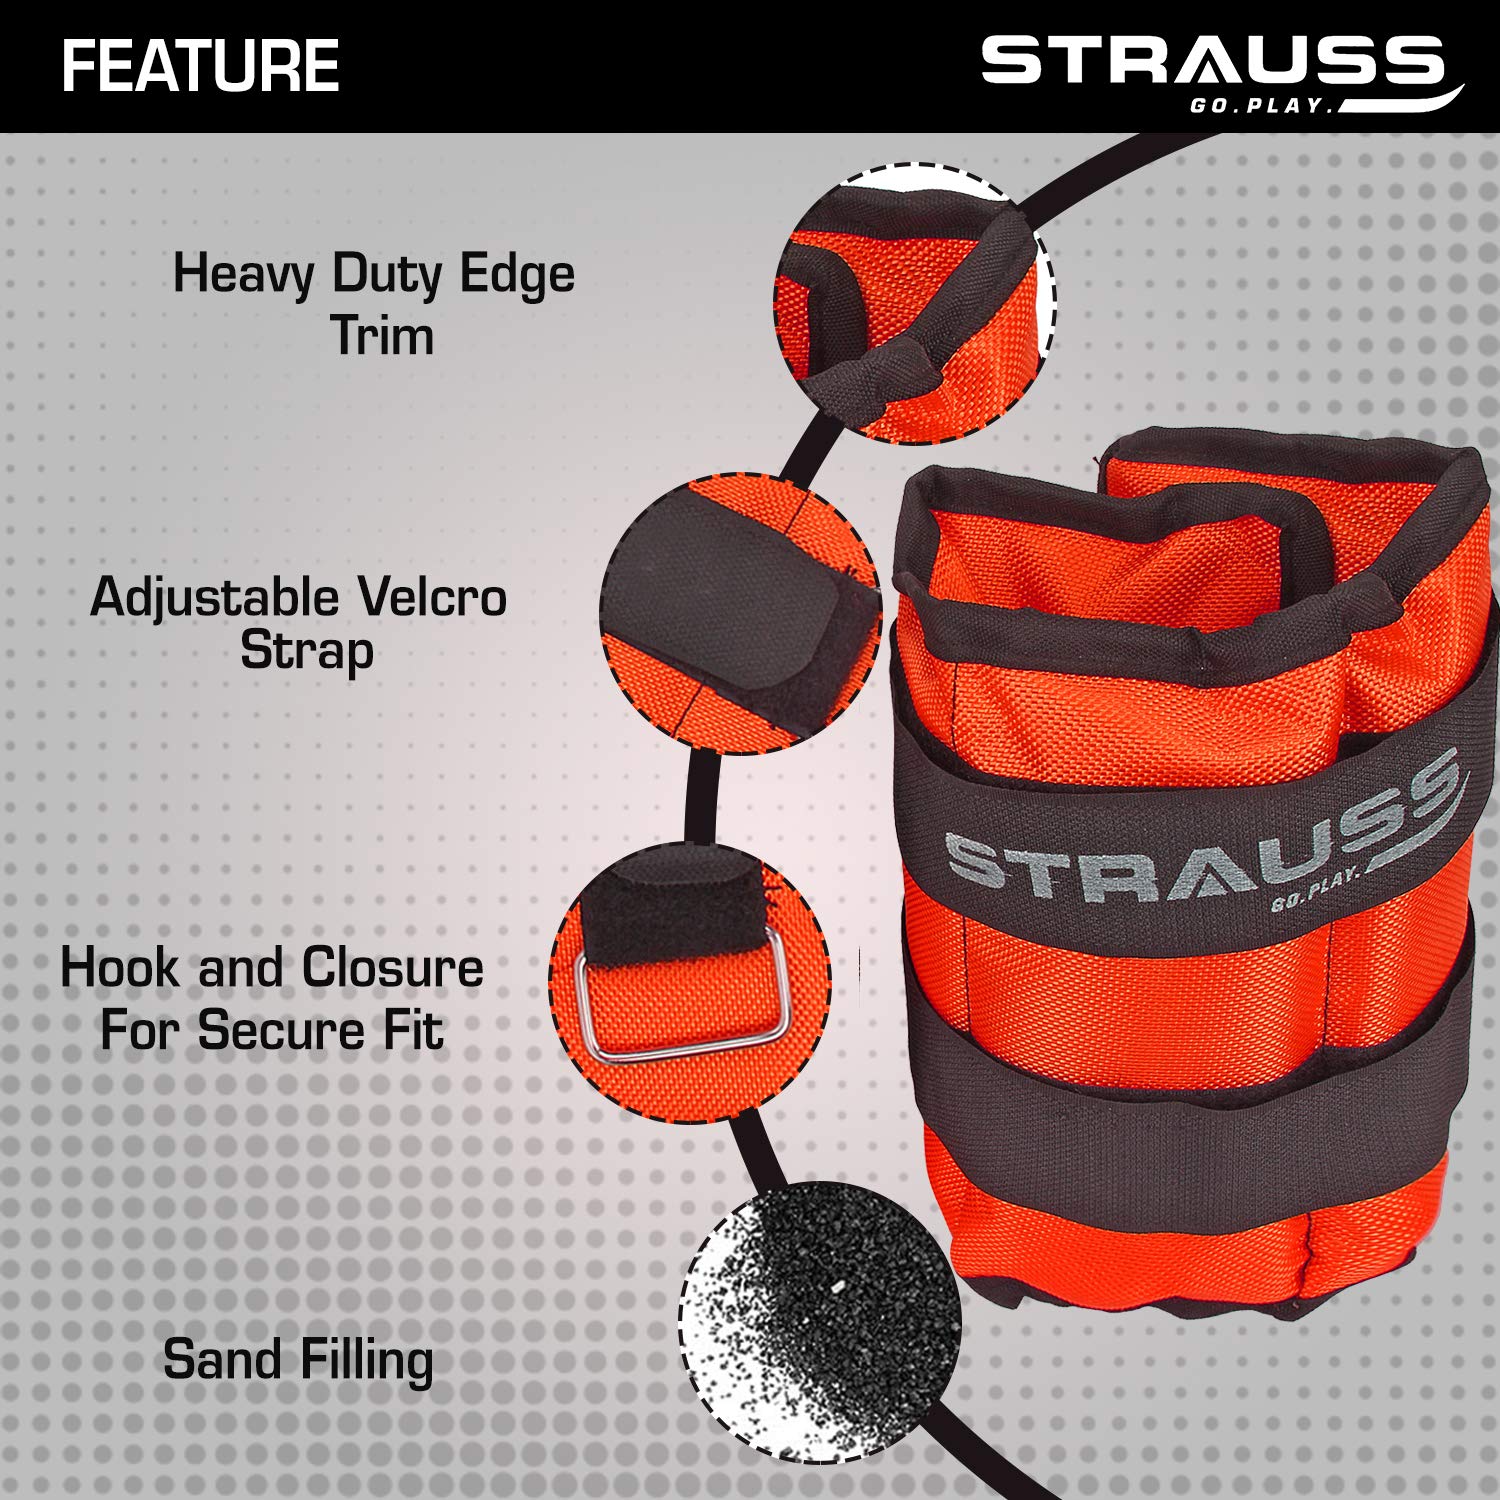 Strauss Adjustable Ankle/Wrist Weights 2 KG X 2 | Ideal for Walking, Running, Jogging, Cycling, Gym, Workout & Strength Training | Easy to Use on Ankle, Wrist, Leg, (Orange)